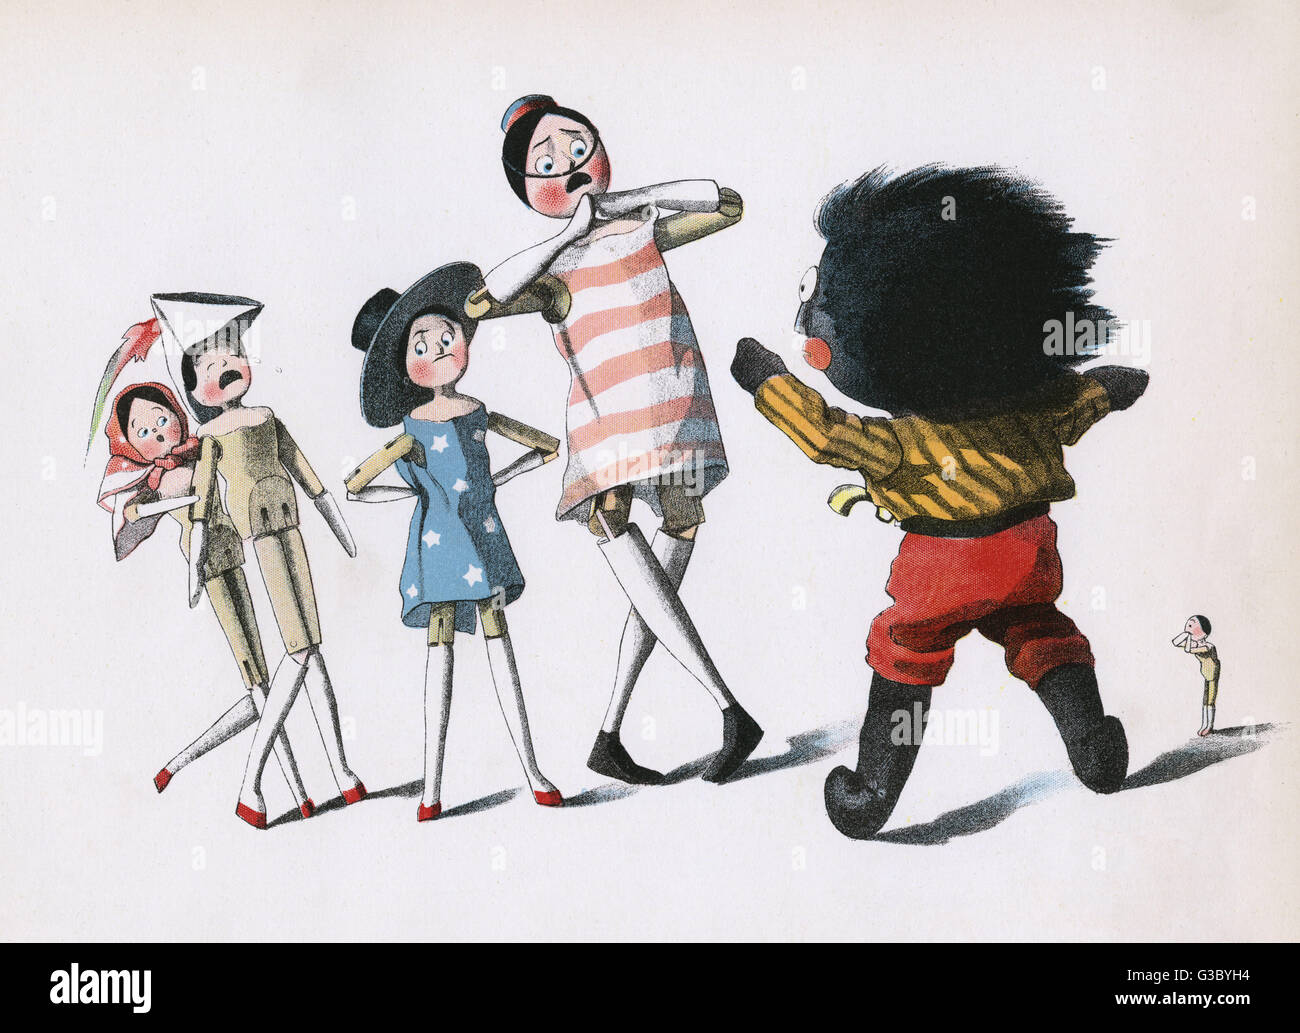 Golliwogg tells the peg dolls scare stories of Turks. The book charts Golliwogg's adventures with his dutch peg doll friends Peggy, Weg, Meg, Sarah Jane and the dinky little Midget. This is the 2nd title in a 13-book series of Golliwogg books written by m Stock Photo